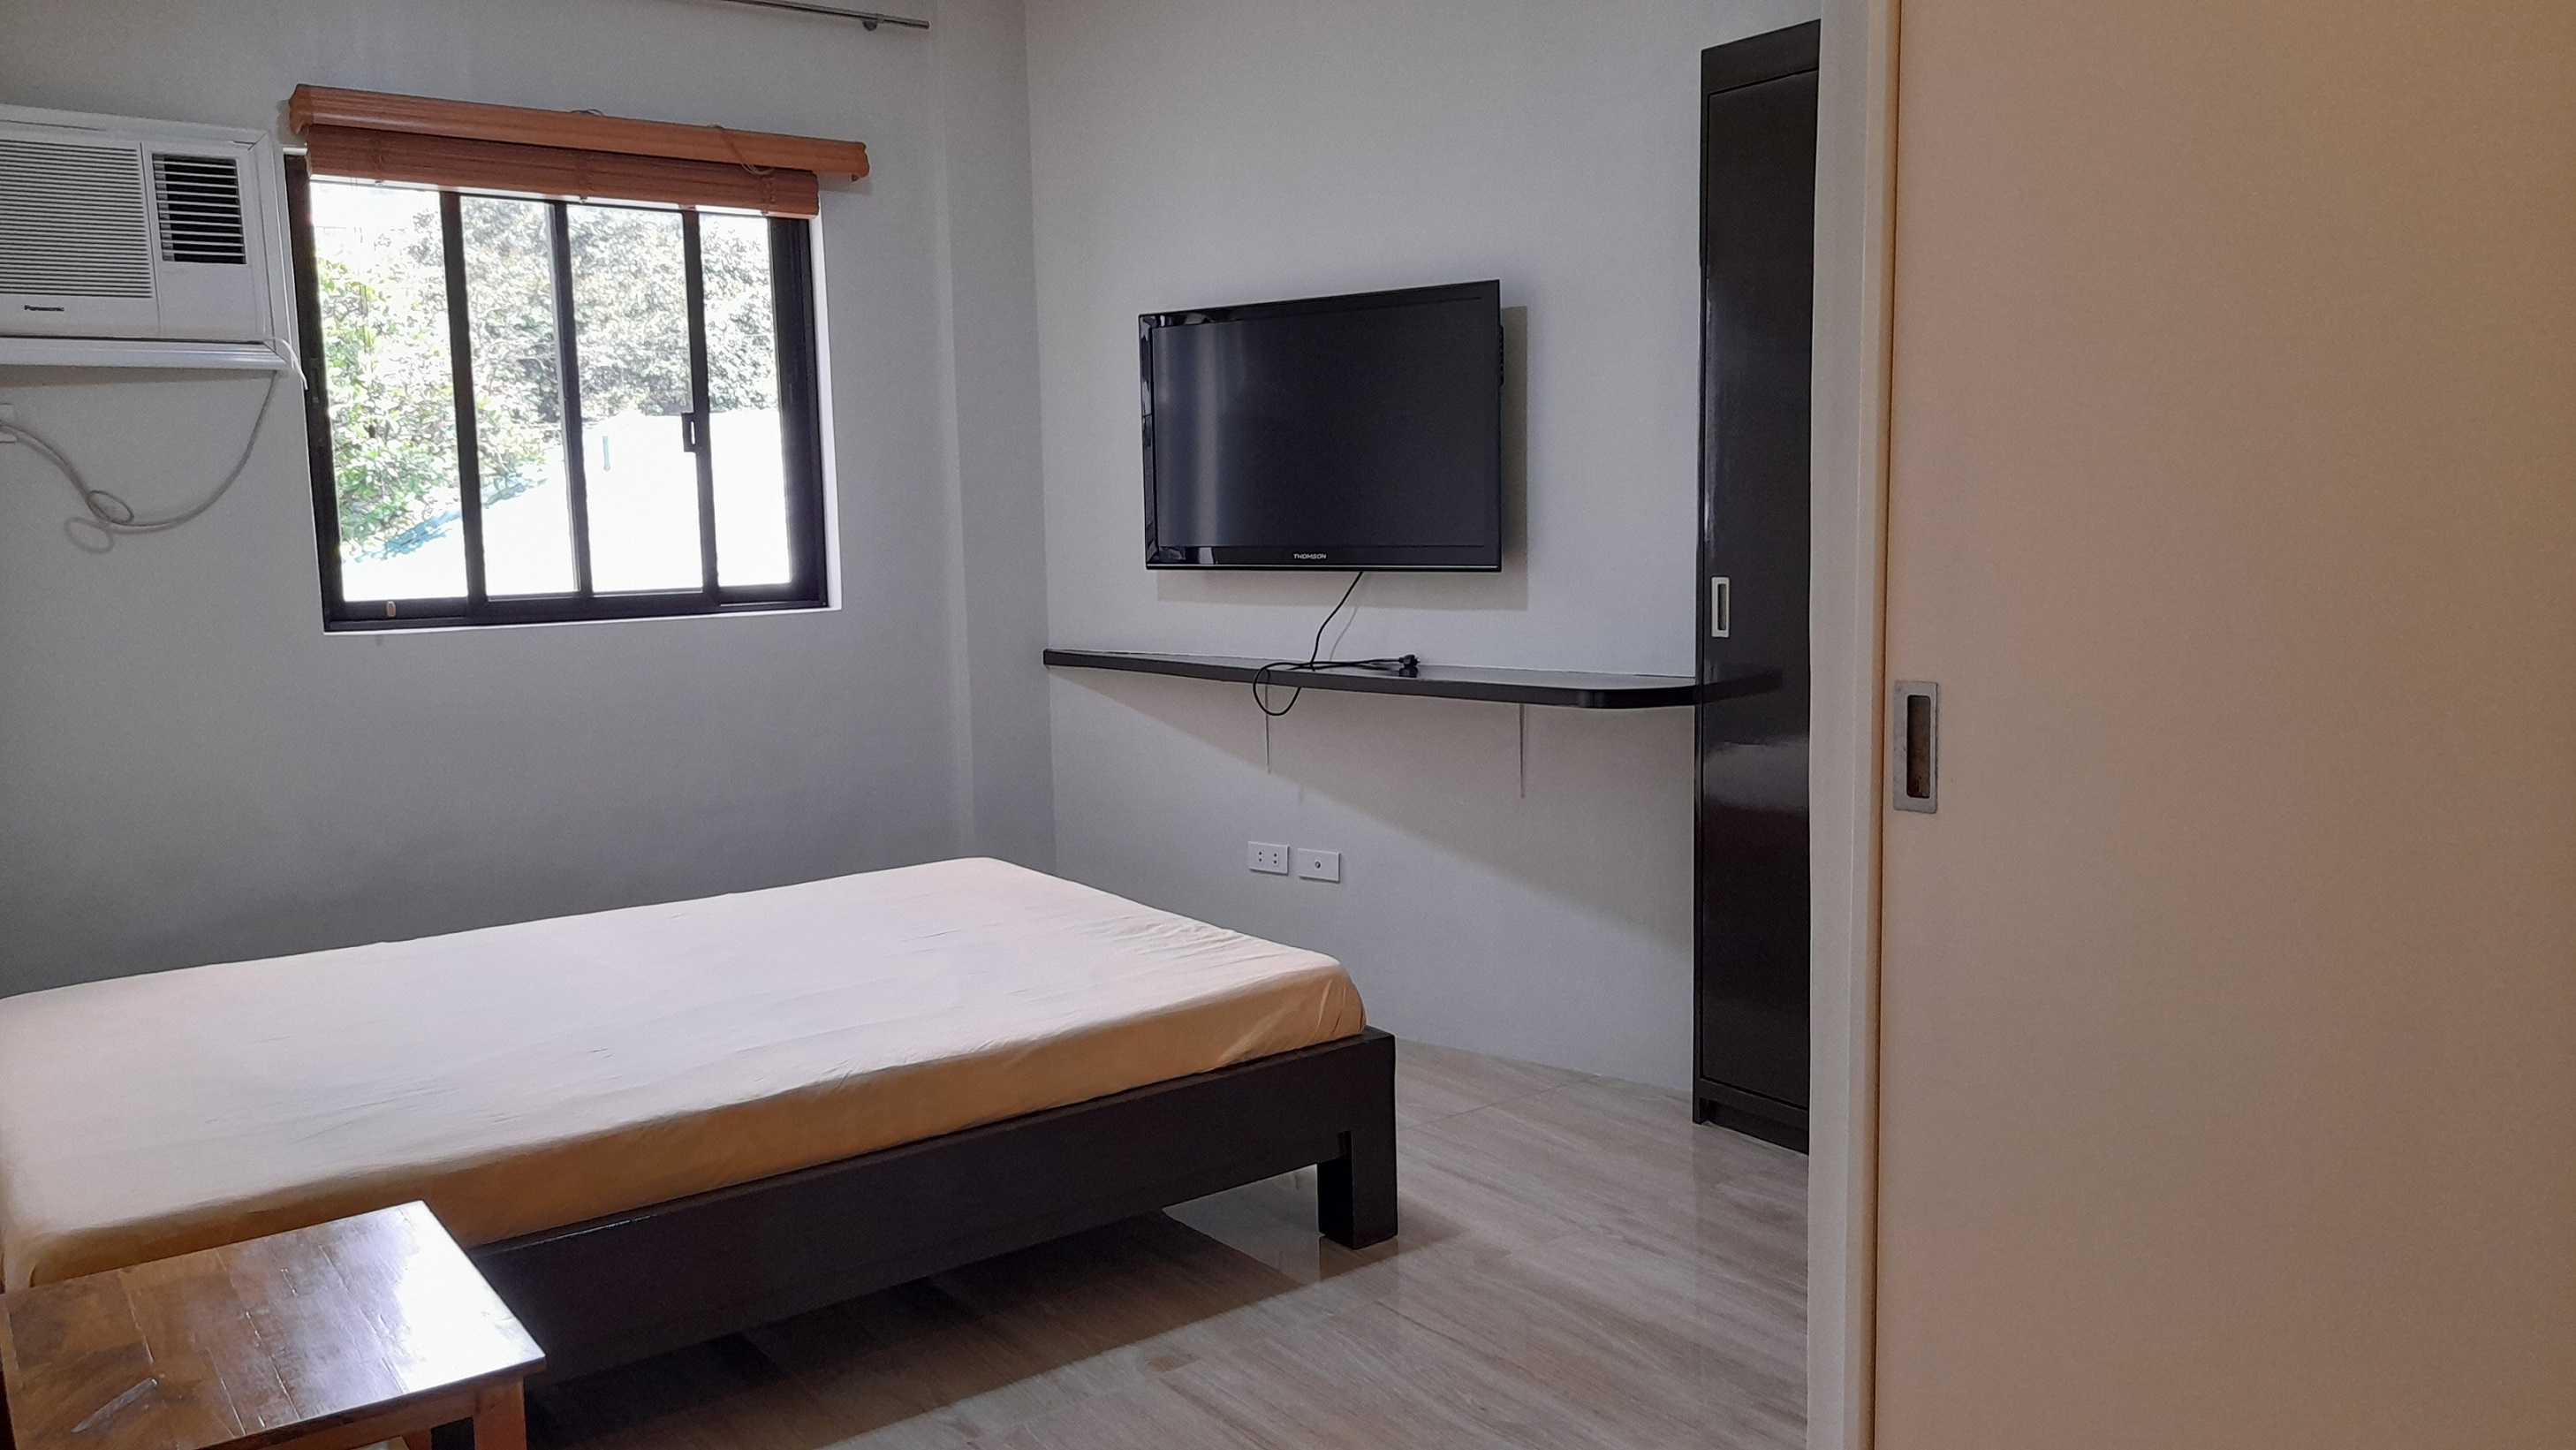 2-bedroom-furnished-apartment-located-in-mabolo-cebu-city